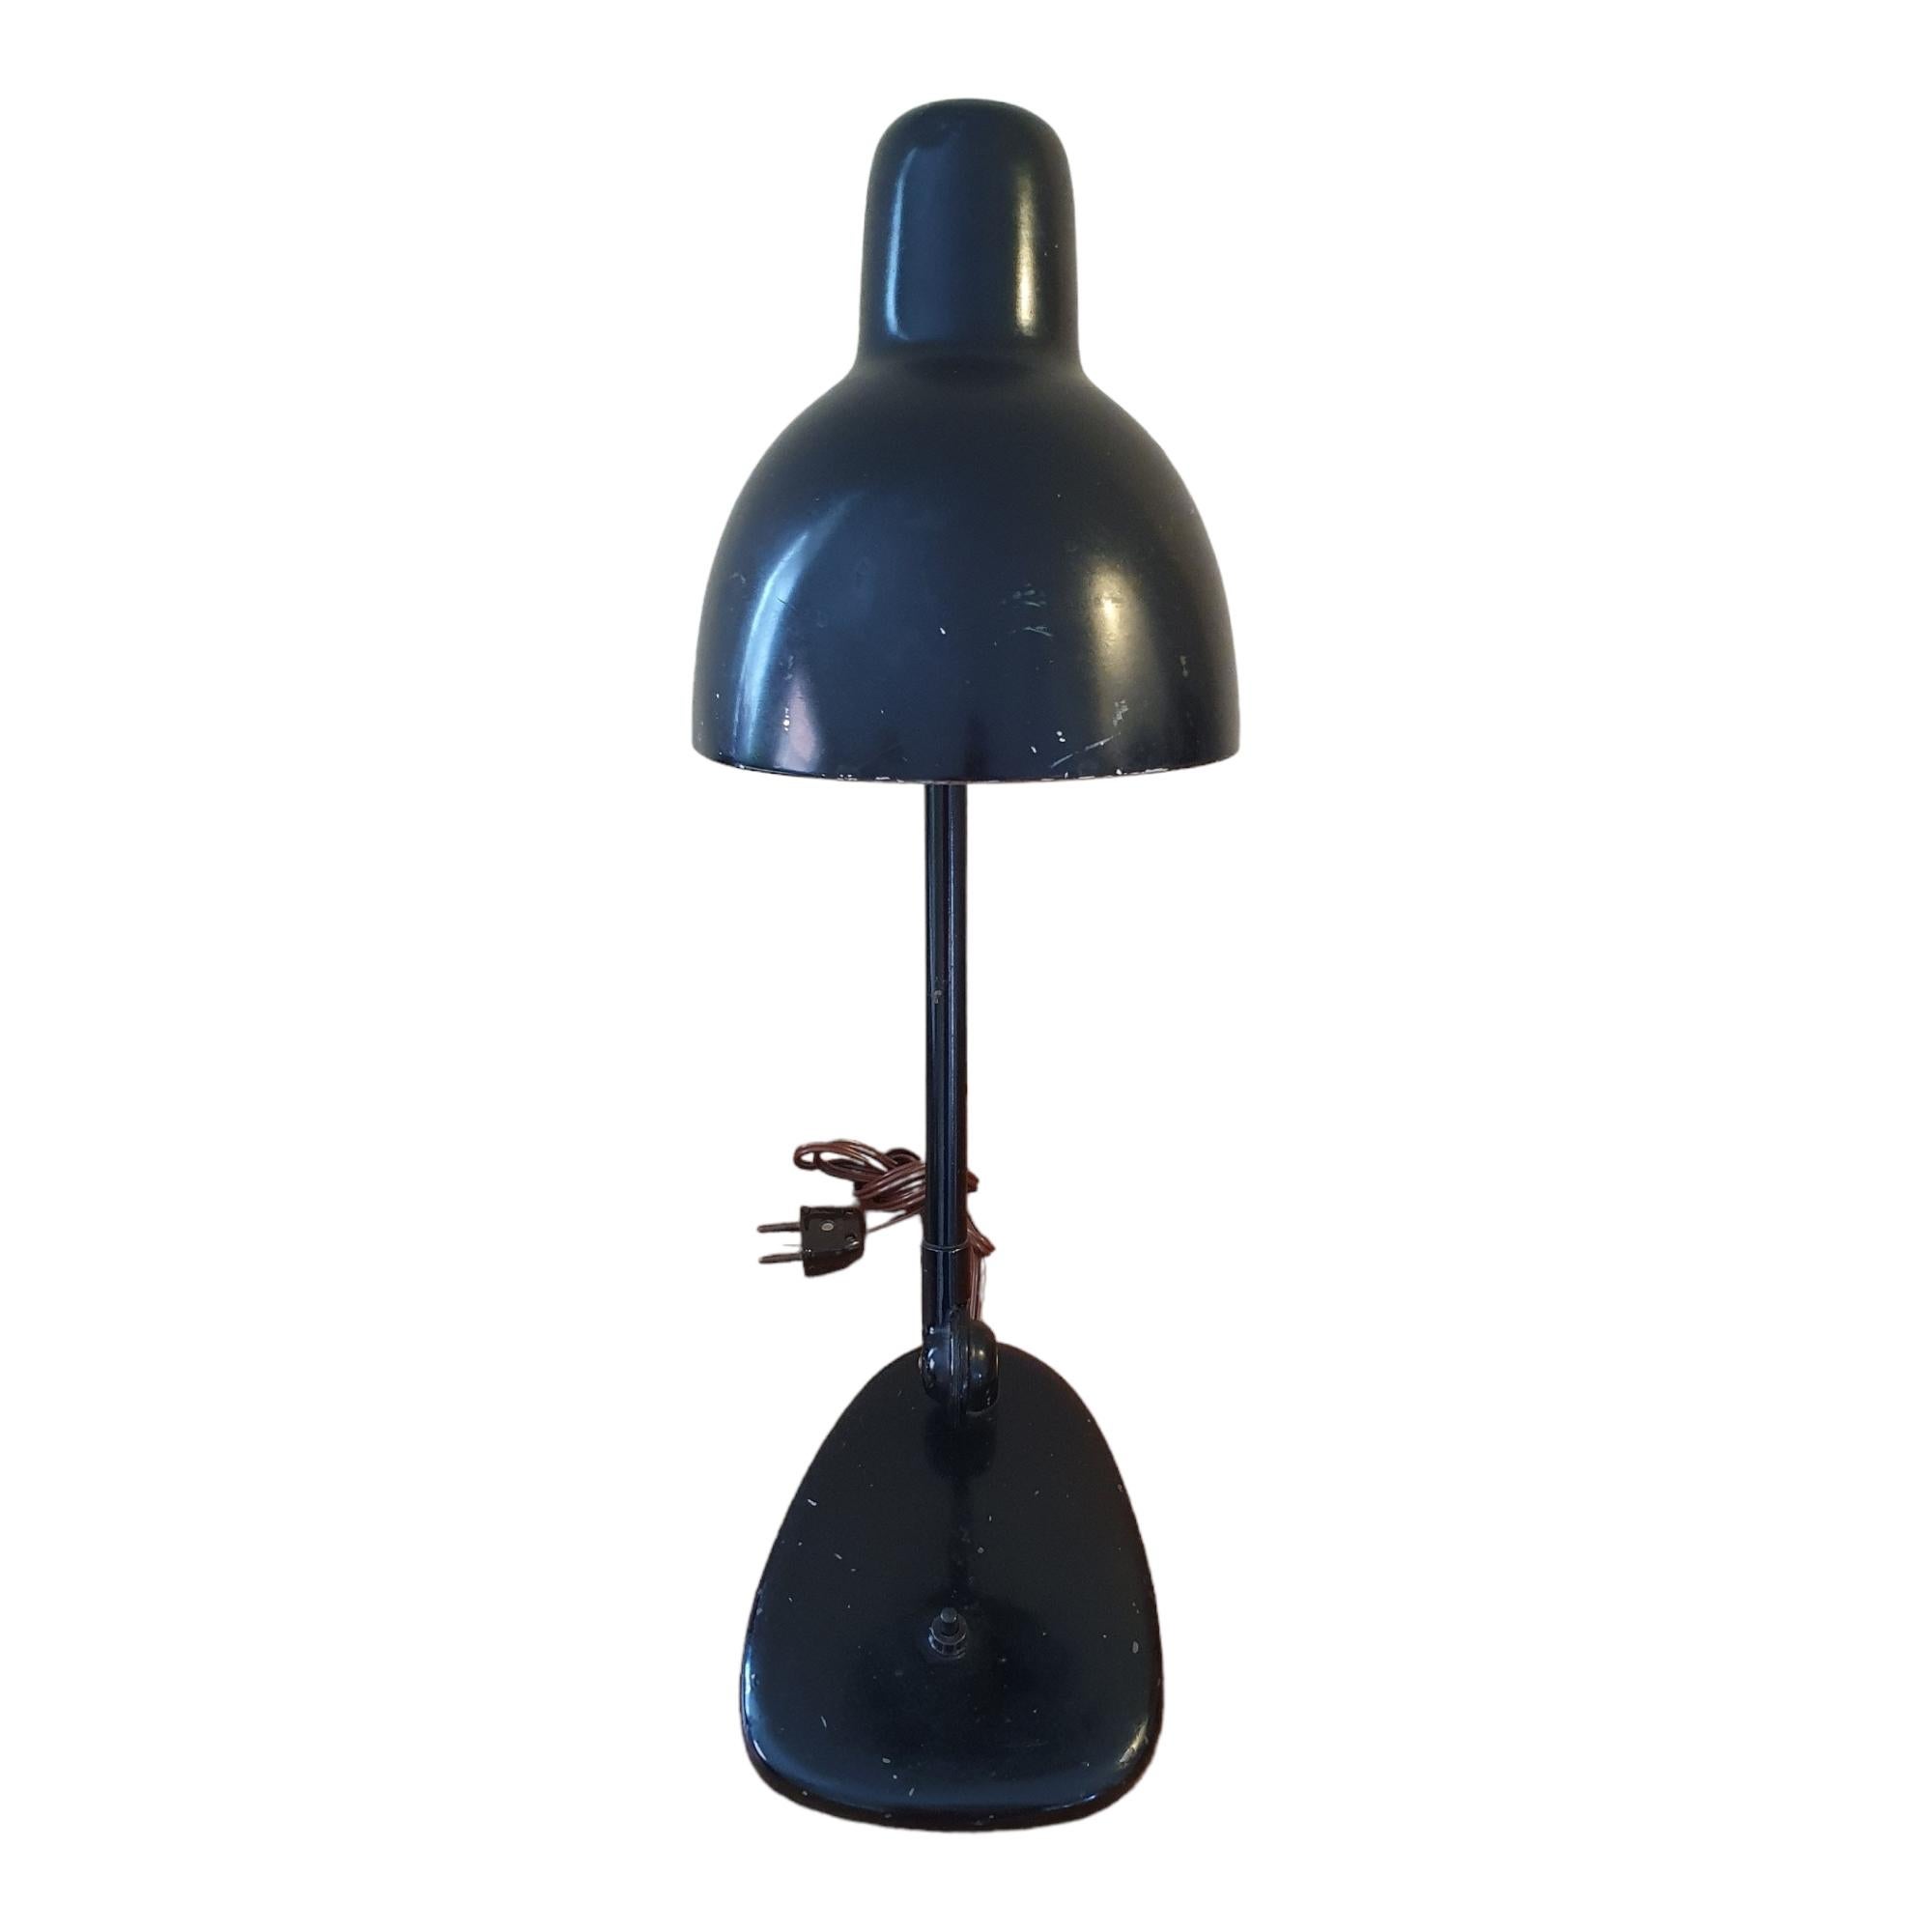 Beautiful original black Bauhaus desk / table lamp. In the style of Marianne Brandt, this lamp is a wonderful representation of the dawn of midcentury modern design reaching backwards with its raw and industrial materials and at the same time